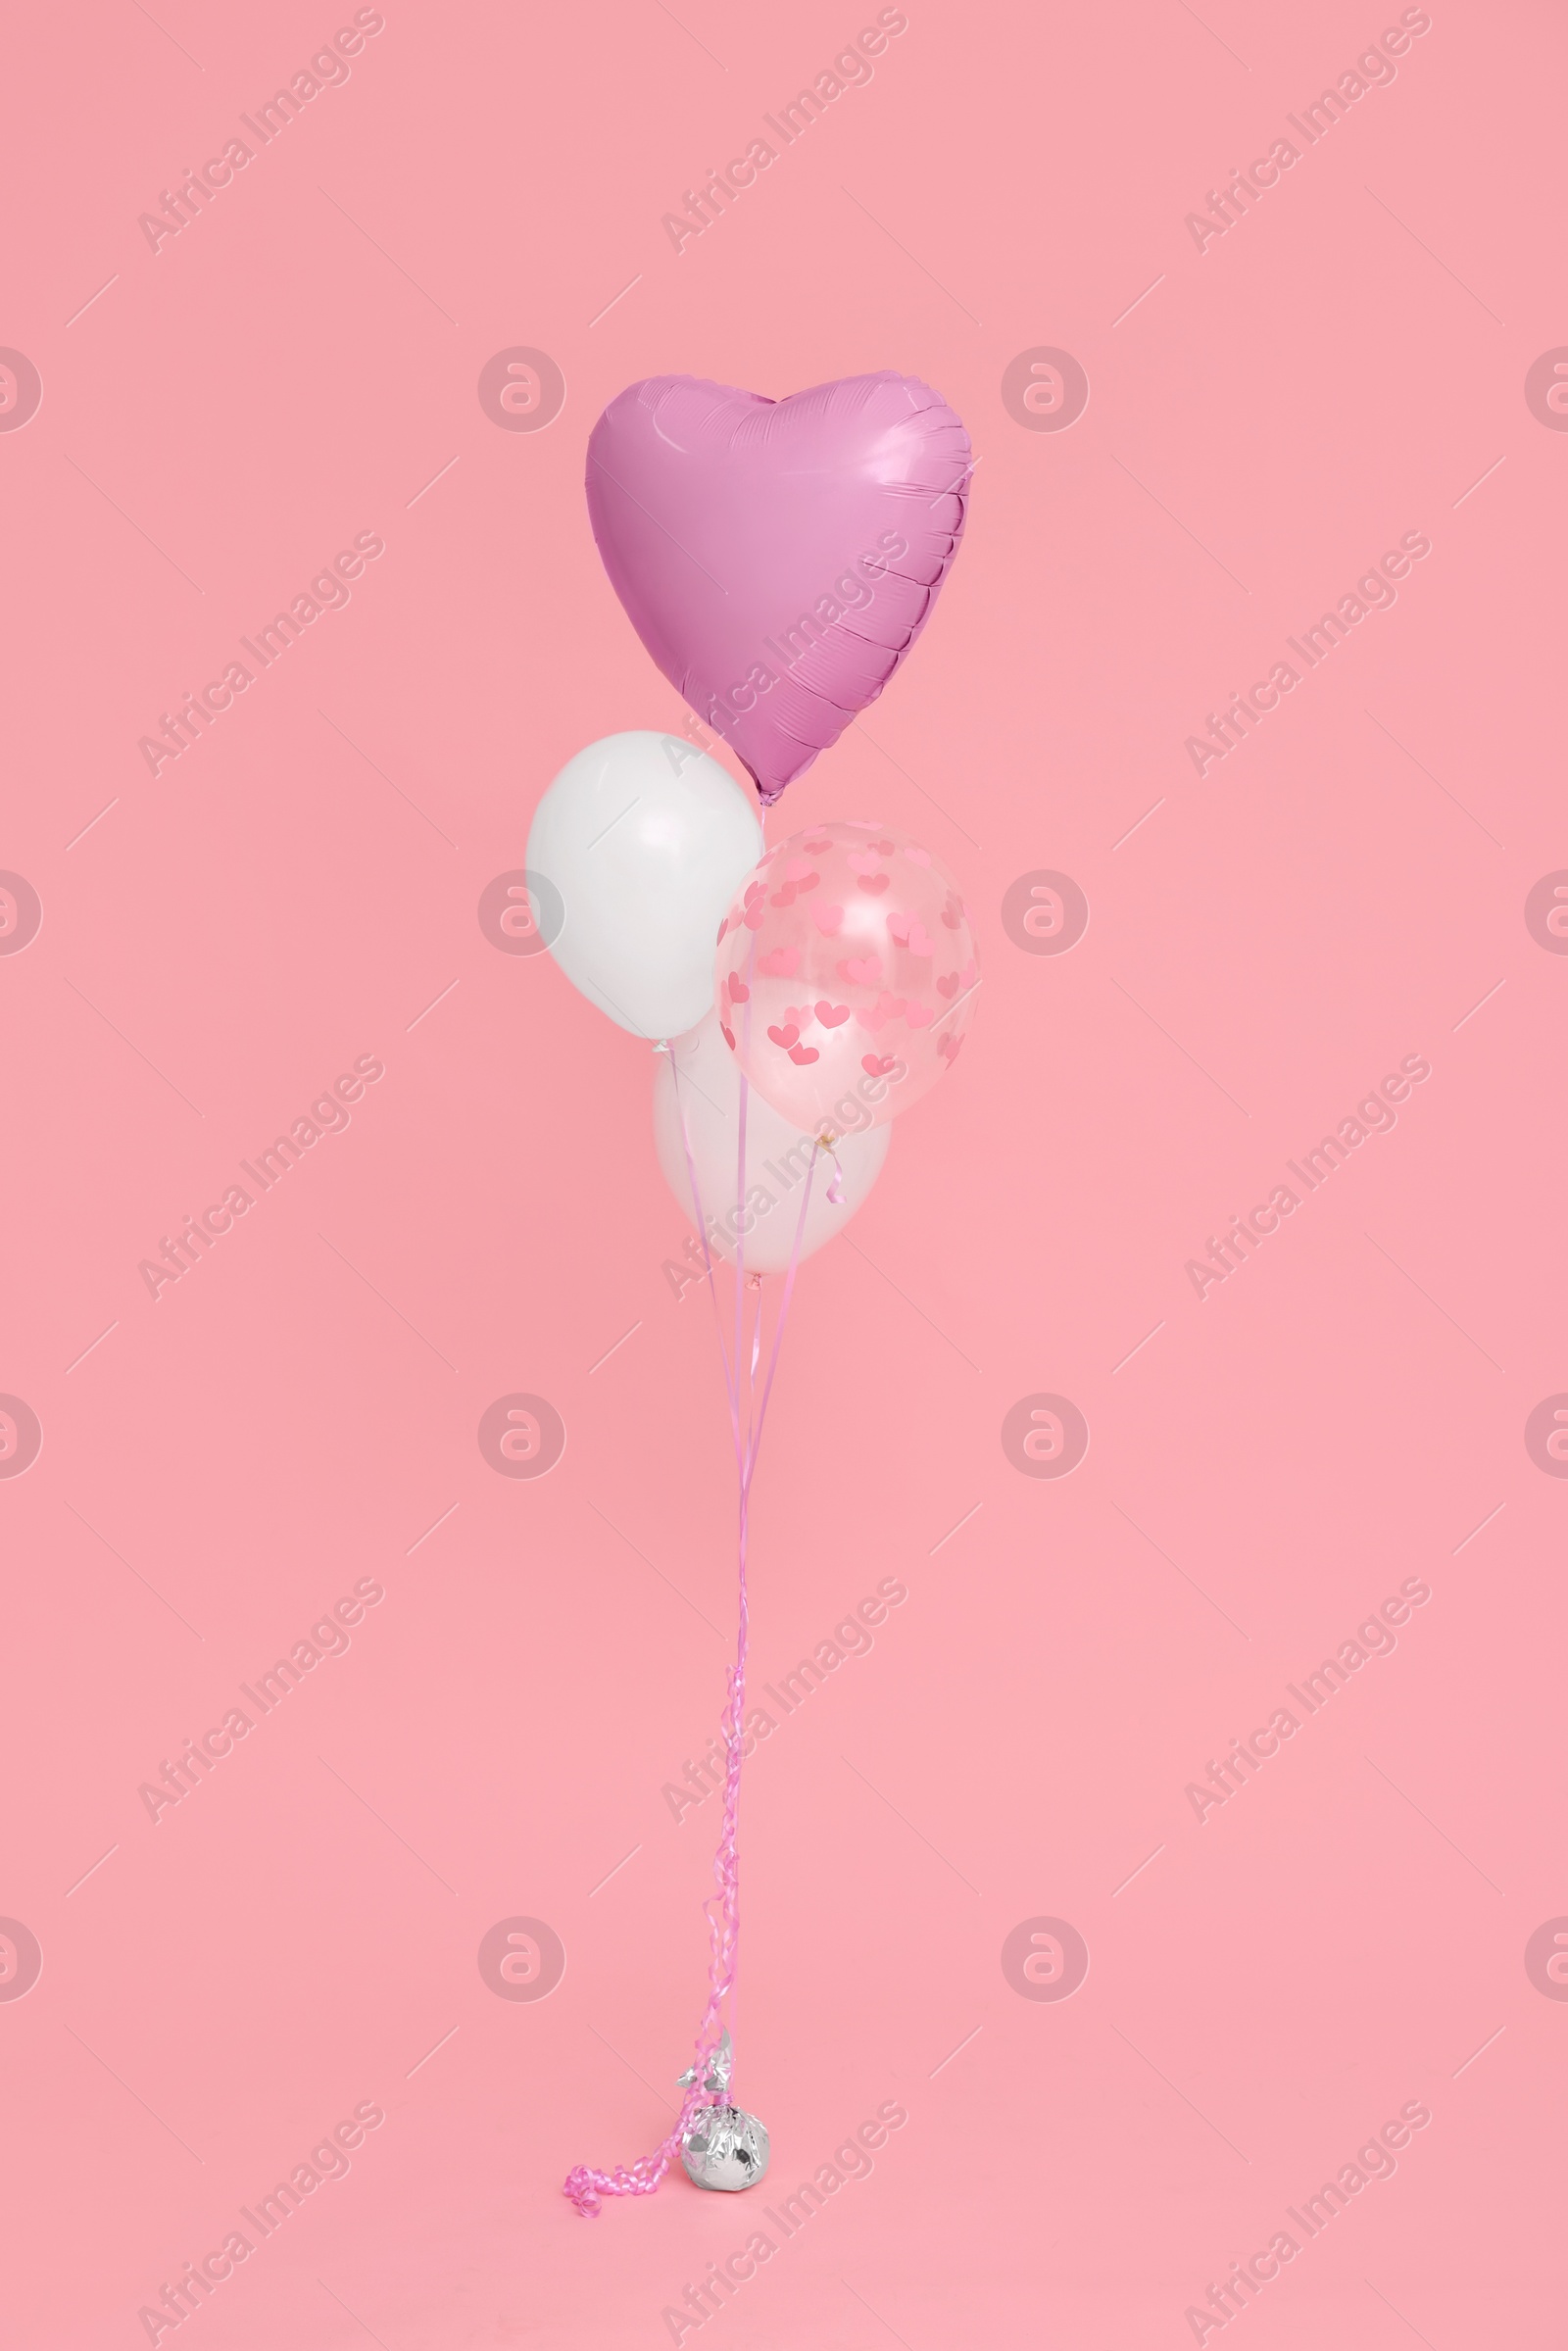 Photo of Bunch of heart and round shaped balloons for birthday party on pink background